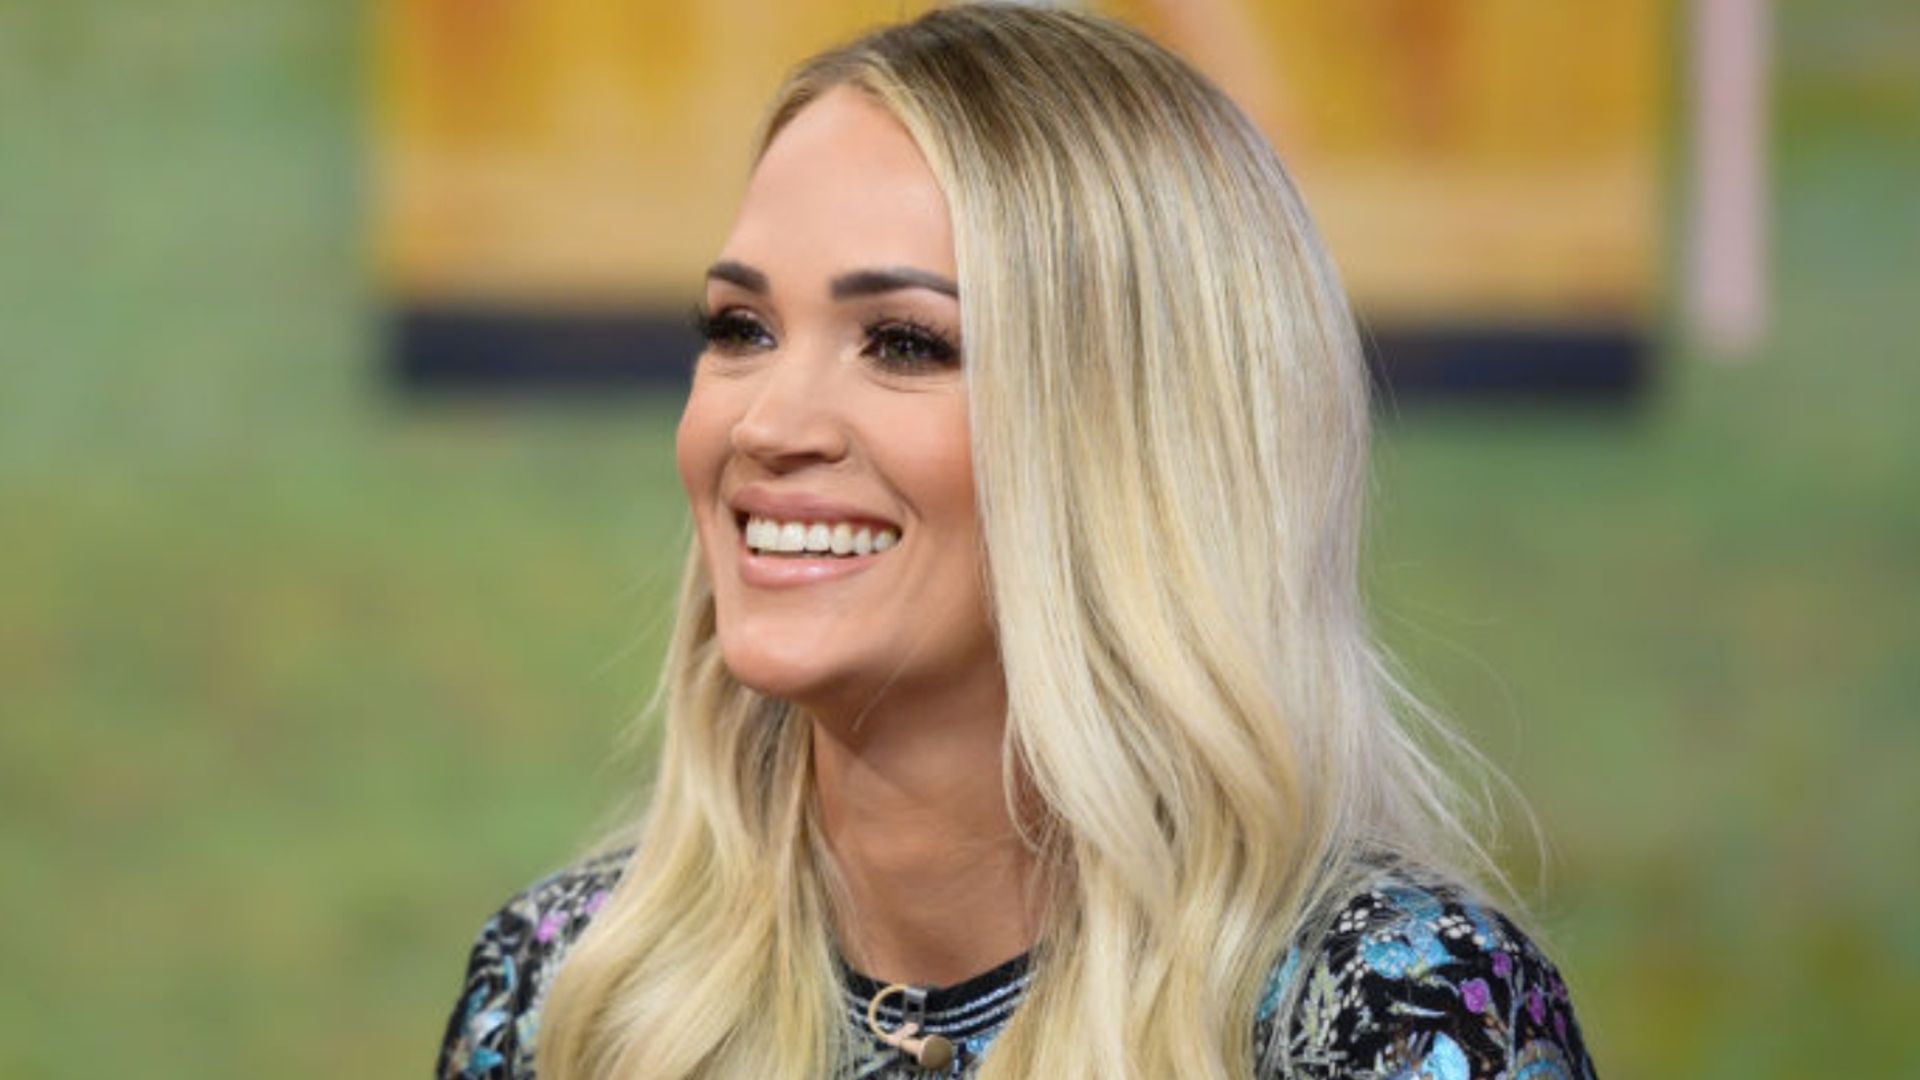 Carrie Underwood rocks perfect fall sweater as she shares behind